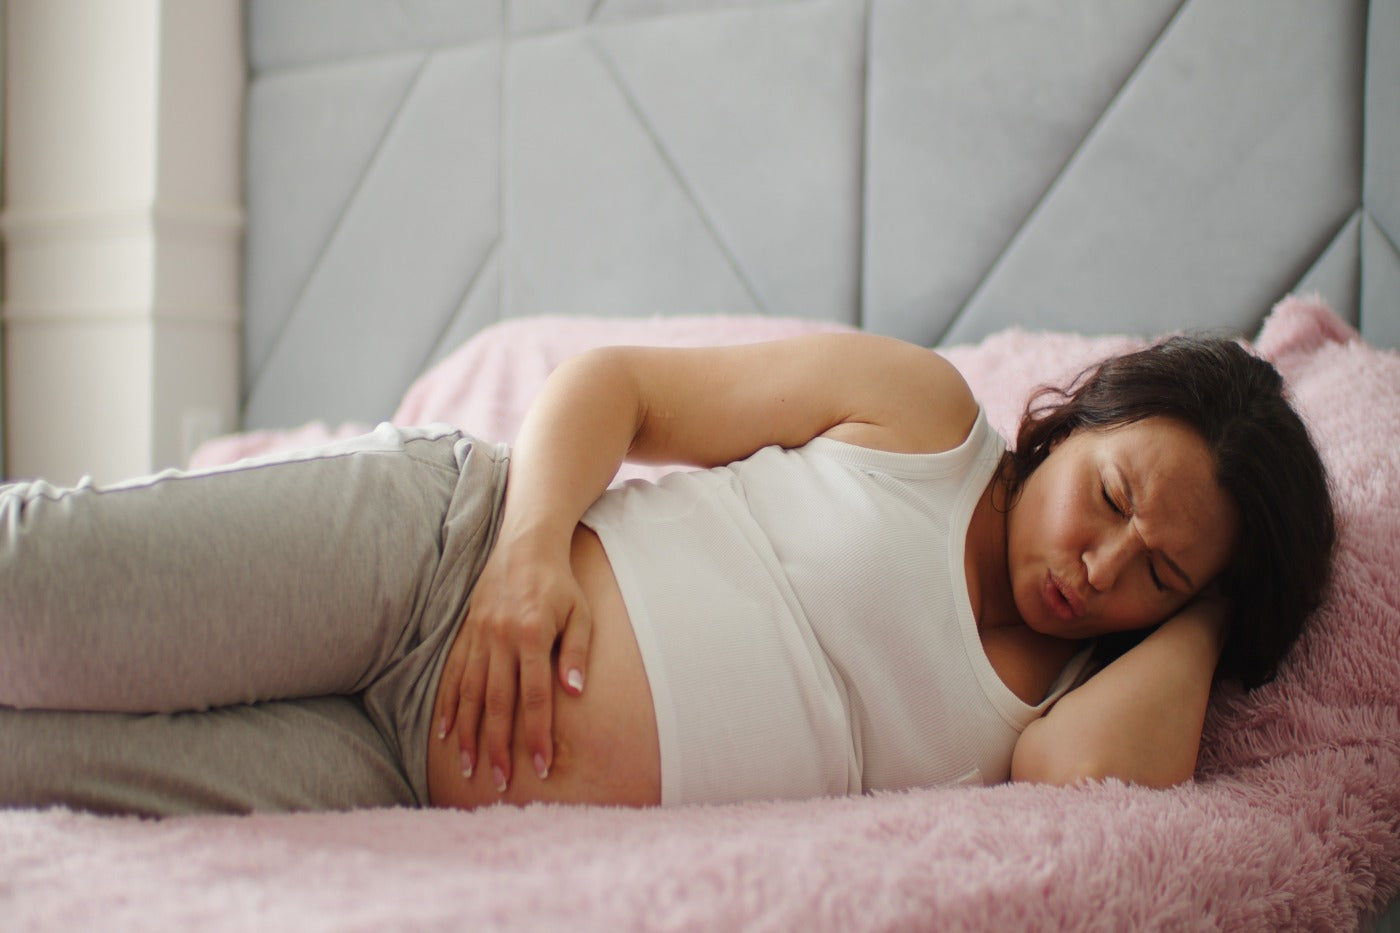 Round Ligament Pain During Pregnancy: Causes and Treatment - Babe by Hatch